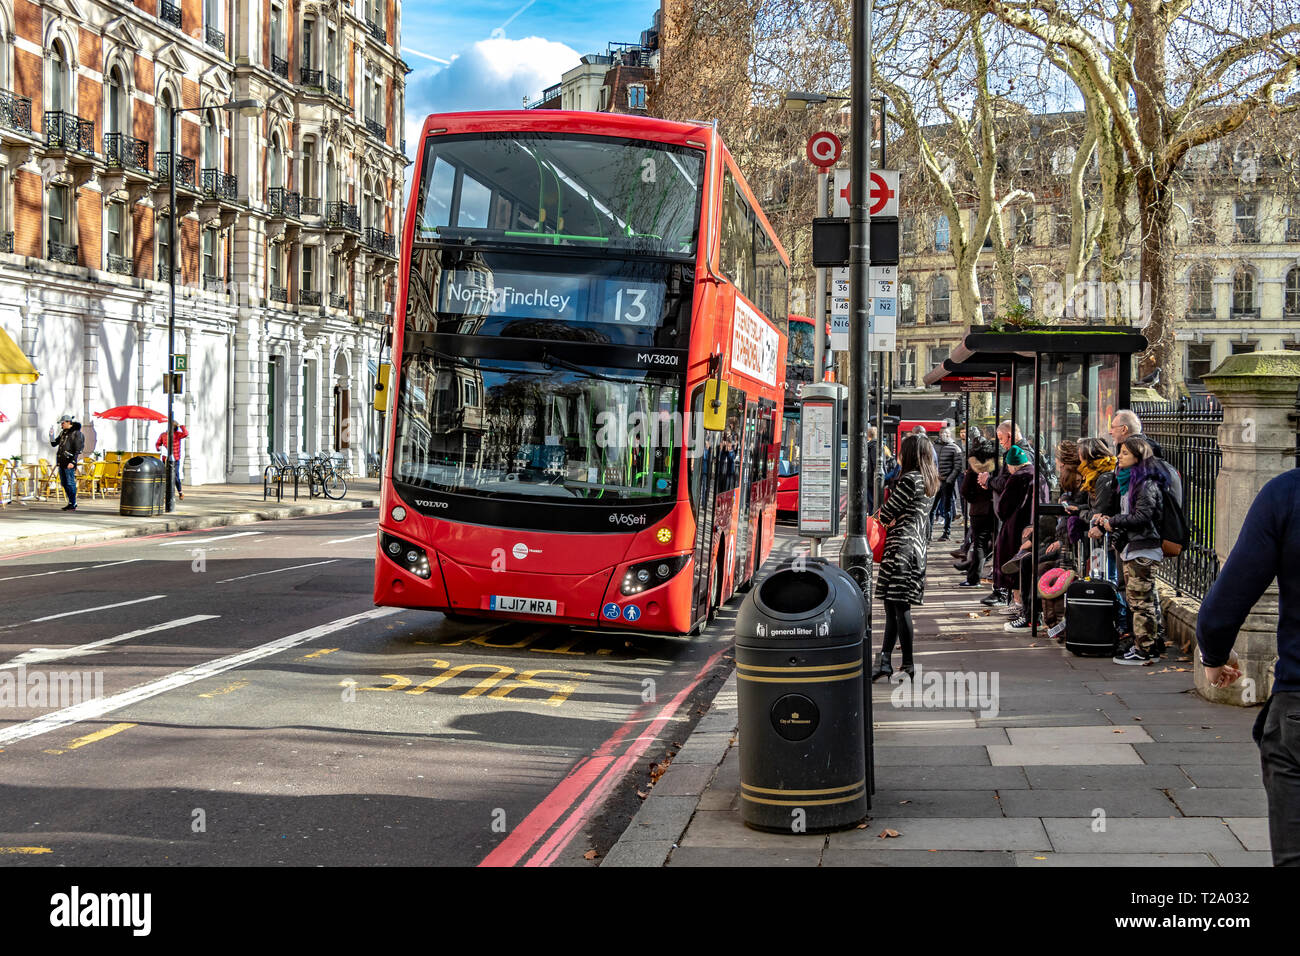 A No 13 London Bus to North Finchley at Grosvenor Gardens Bus stop in Victoria, London, UK Stockfoto